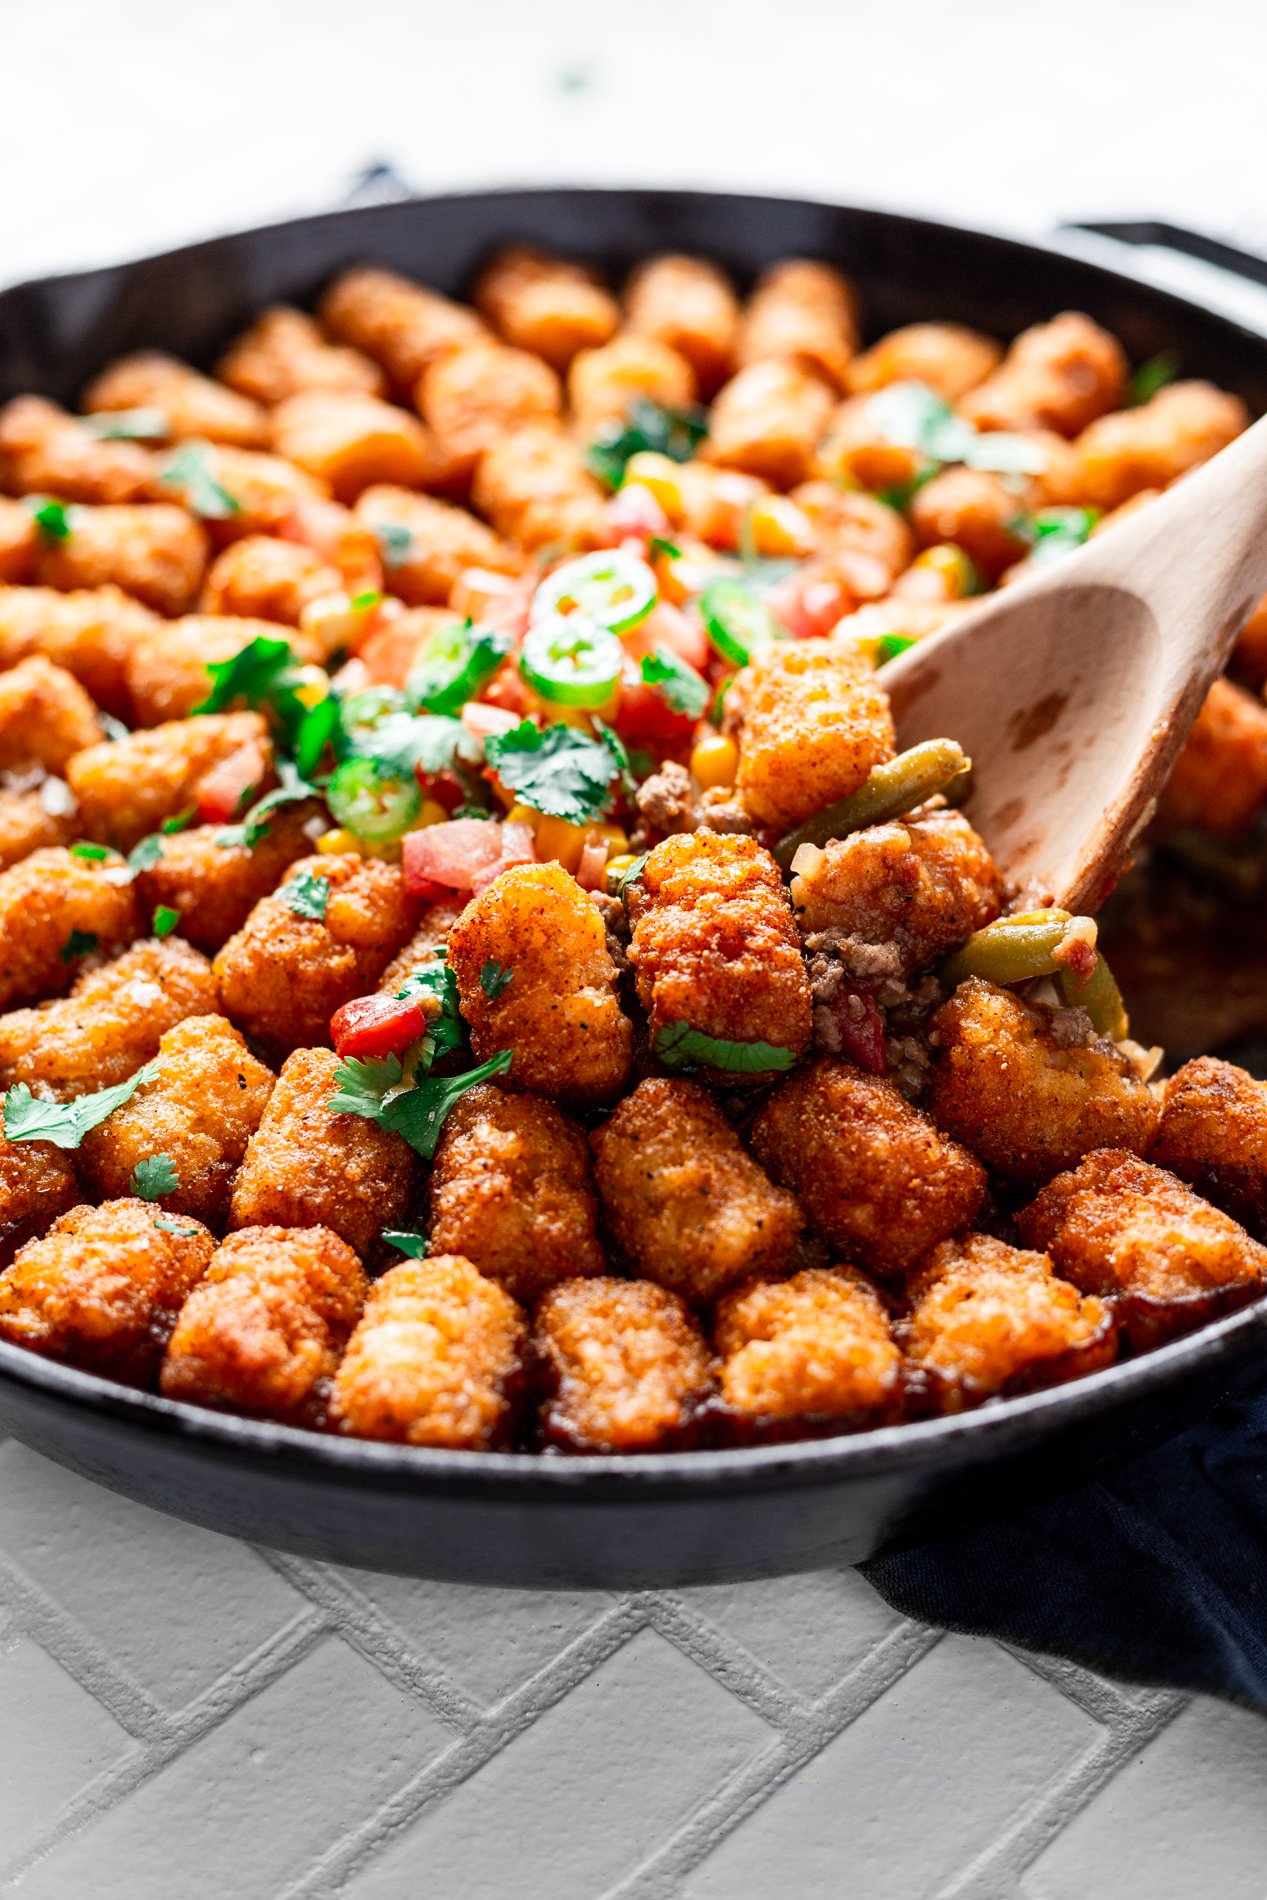 angled view of a scoop of tater tot hotdish being pulled from a skillet